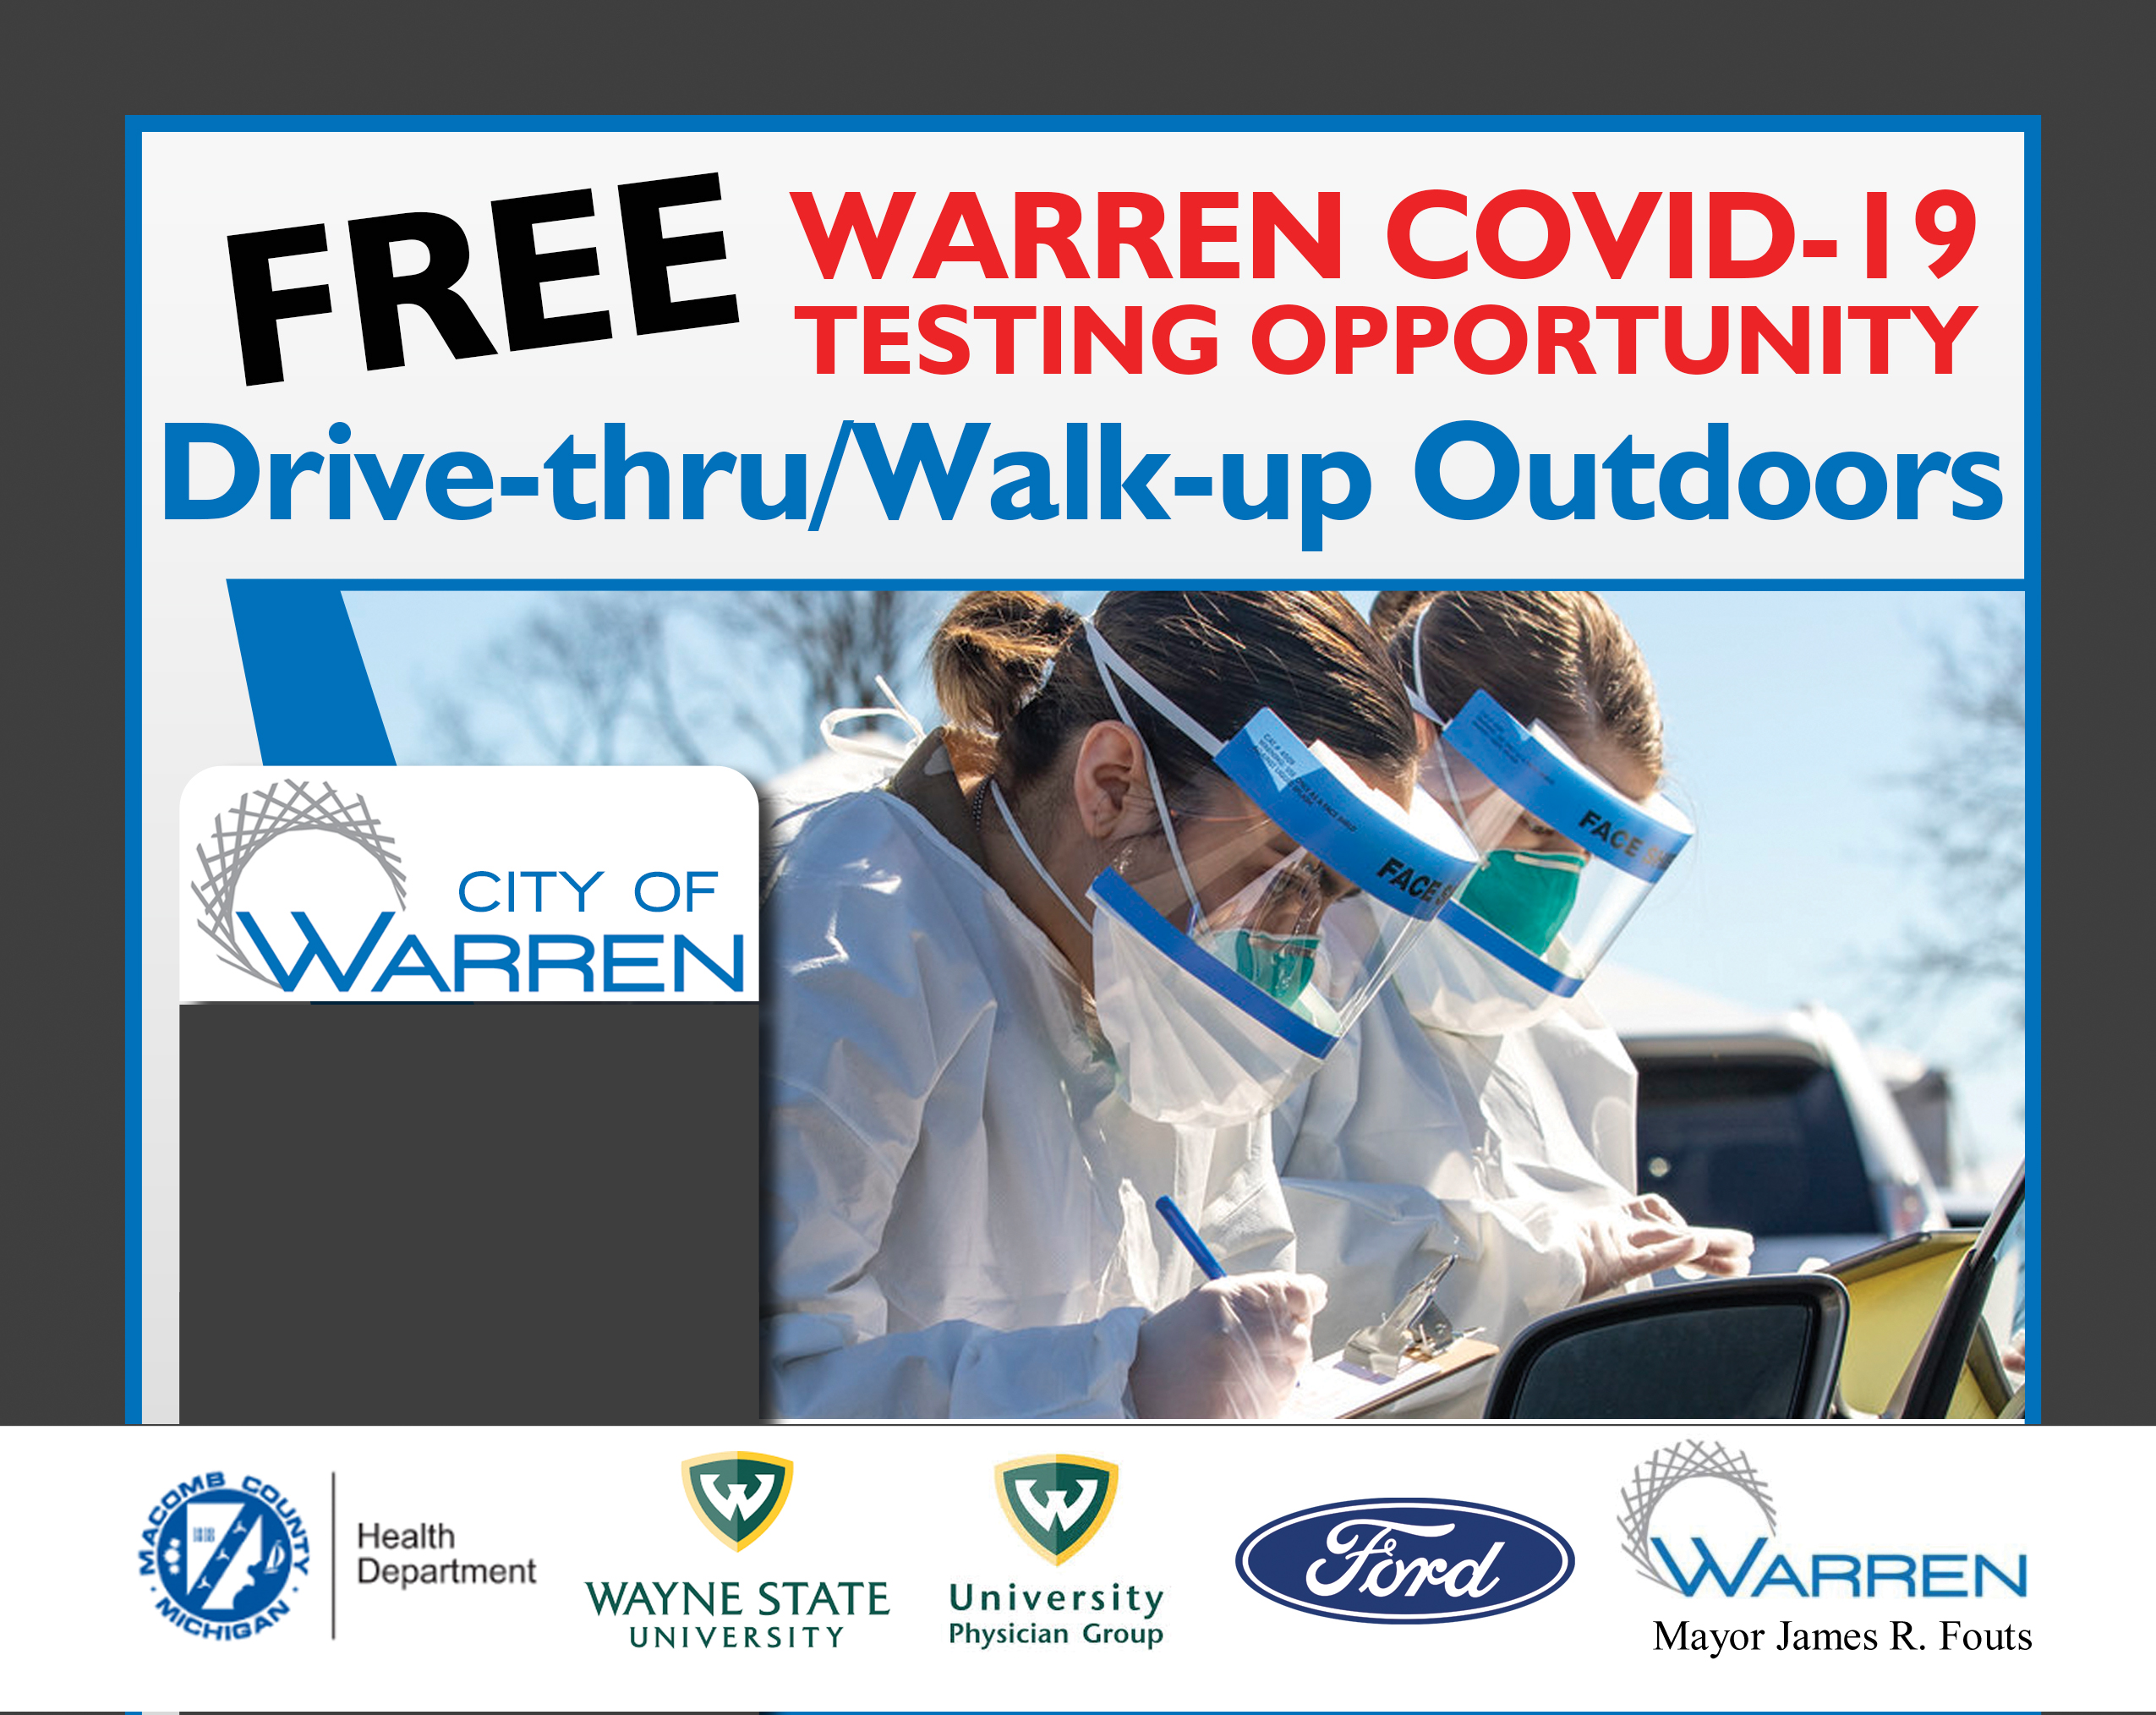 FREE COVID-19 TESTING AT WARREN CITY HALL EVERY THURSDAY AND EVERY SATURDAY, 10AM-3PM